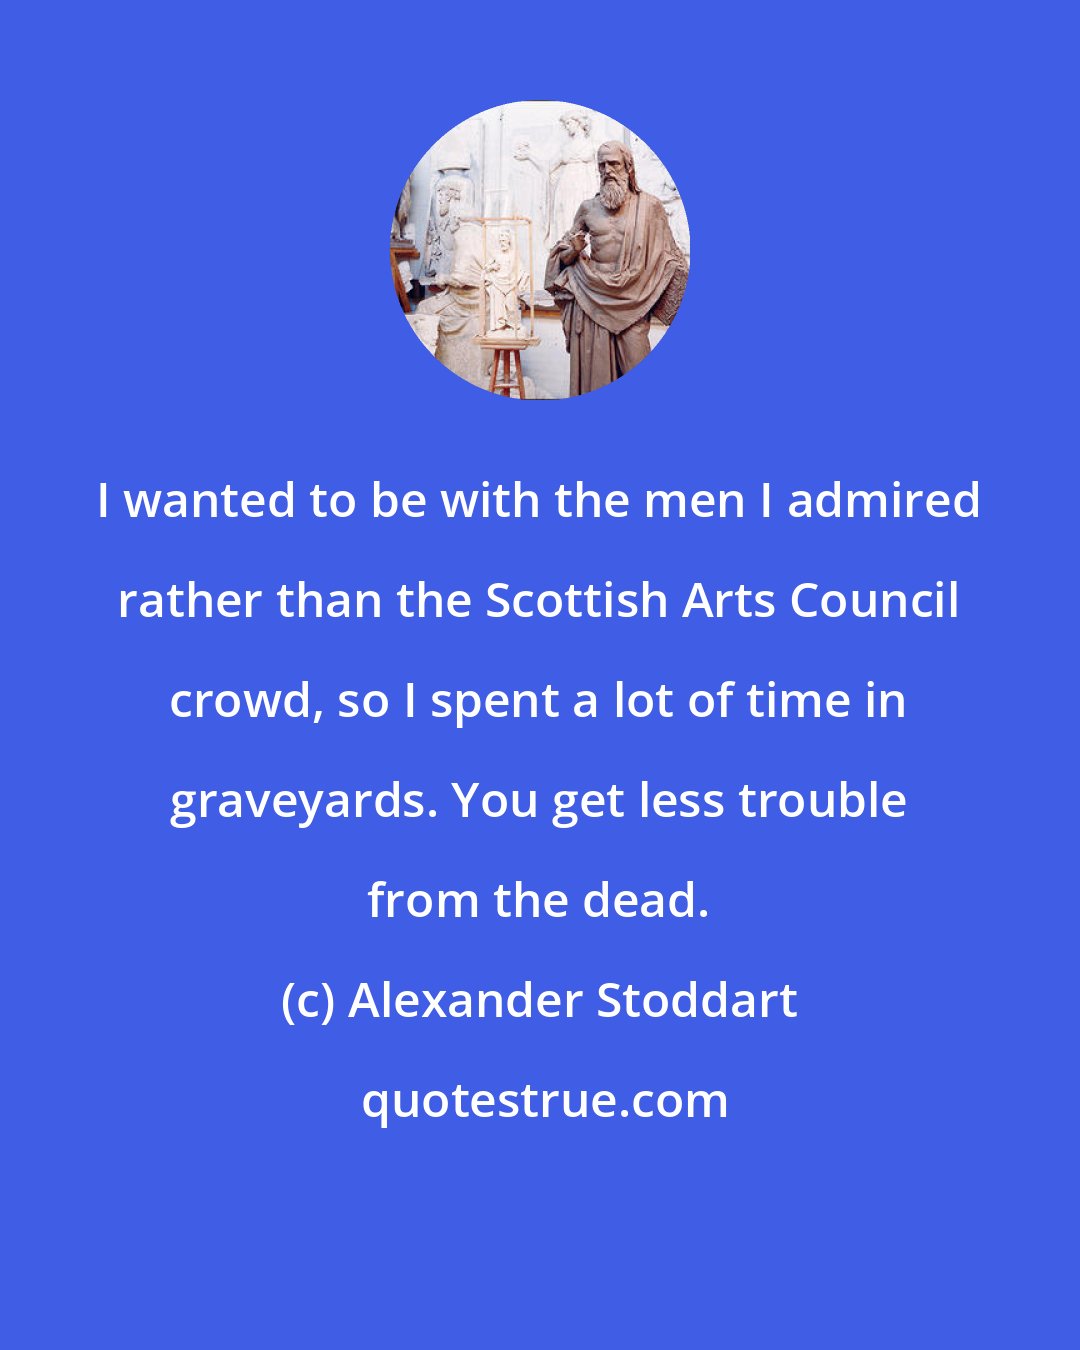 Alexander Stoddart: I wanted to be with the men I admired rather than the Scottish Arts Council crowd, so I spent a lot of time in graveyards. You get less trouble from the dead.